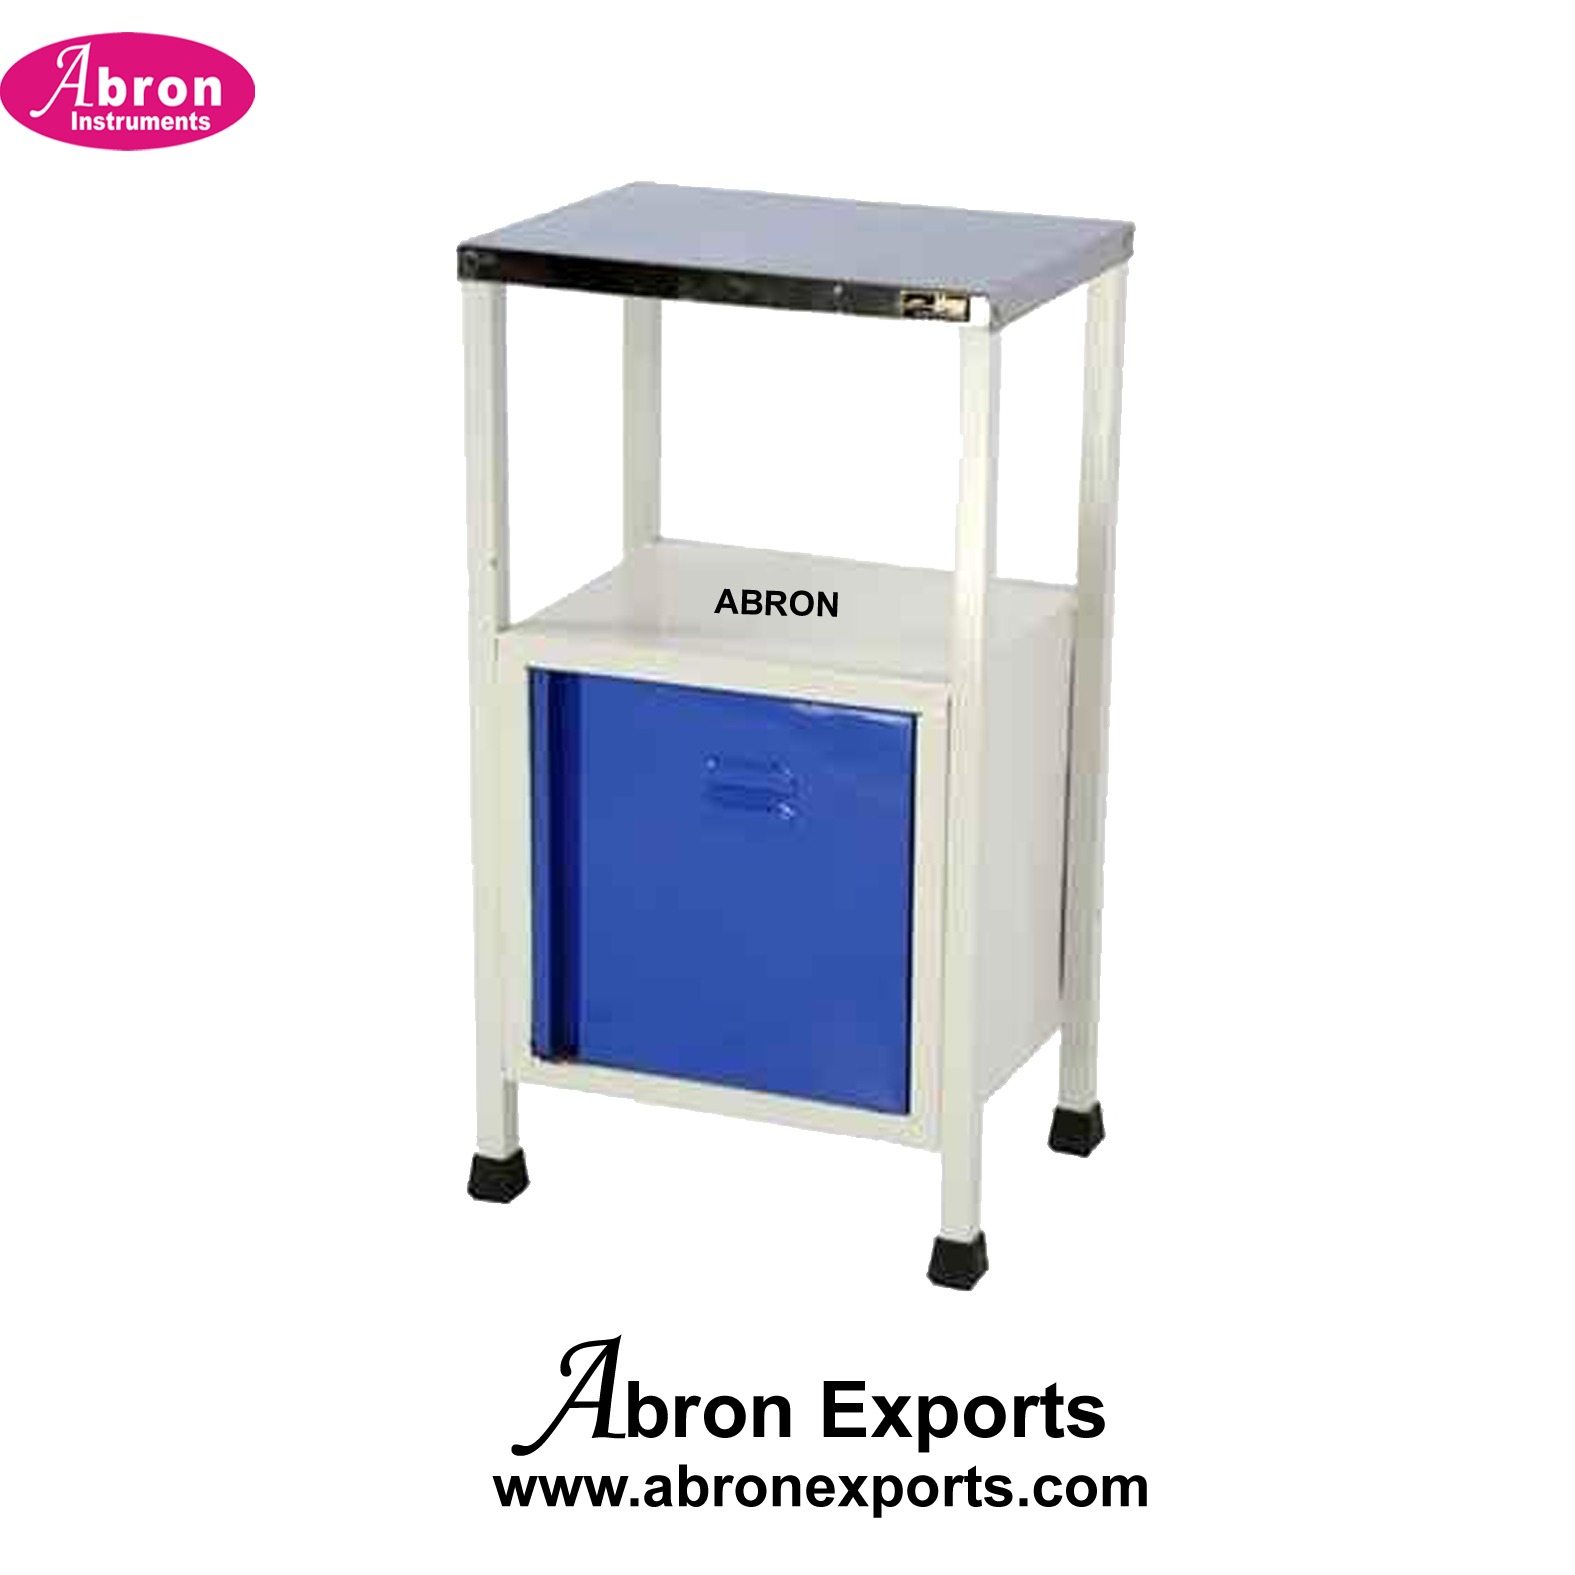 Hospital Bed side metallic cabinet with wheels Nursing Room Abron ABM-2354PC 